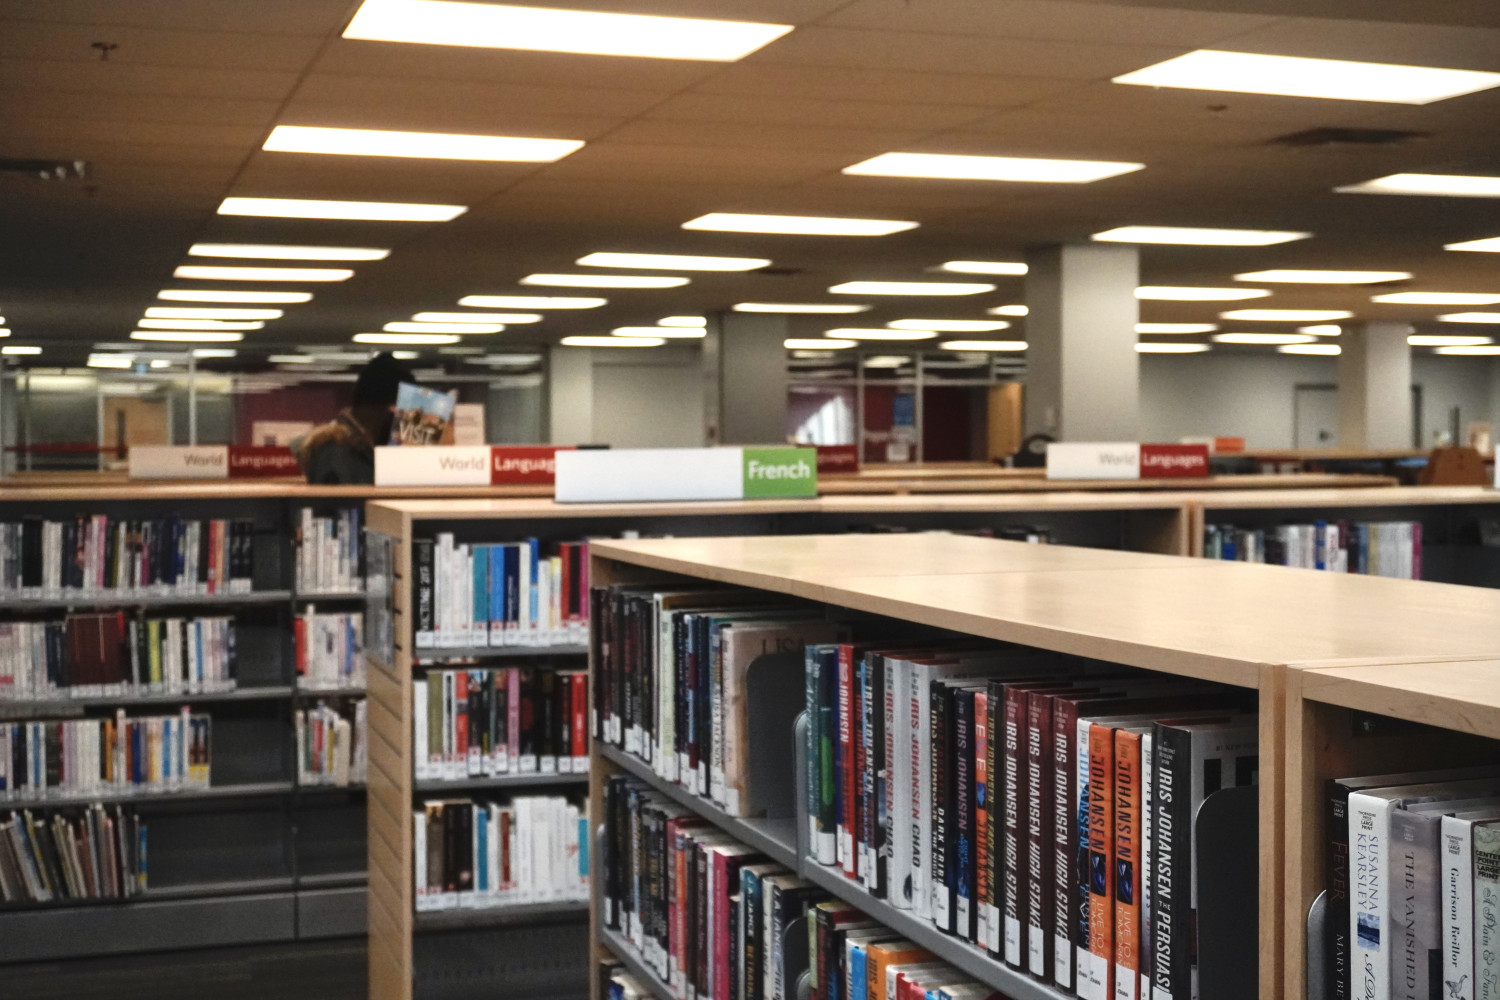 Council promises new permanent home for Chinguacousy library branch; TMU distances itself from Bramalea Civic Centre eviction